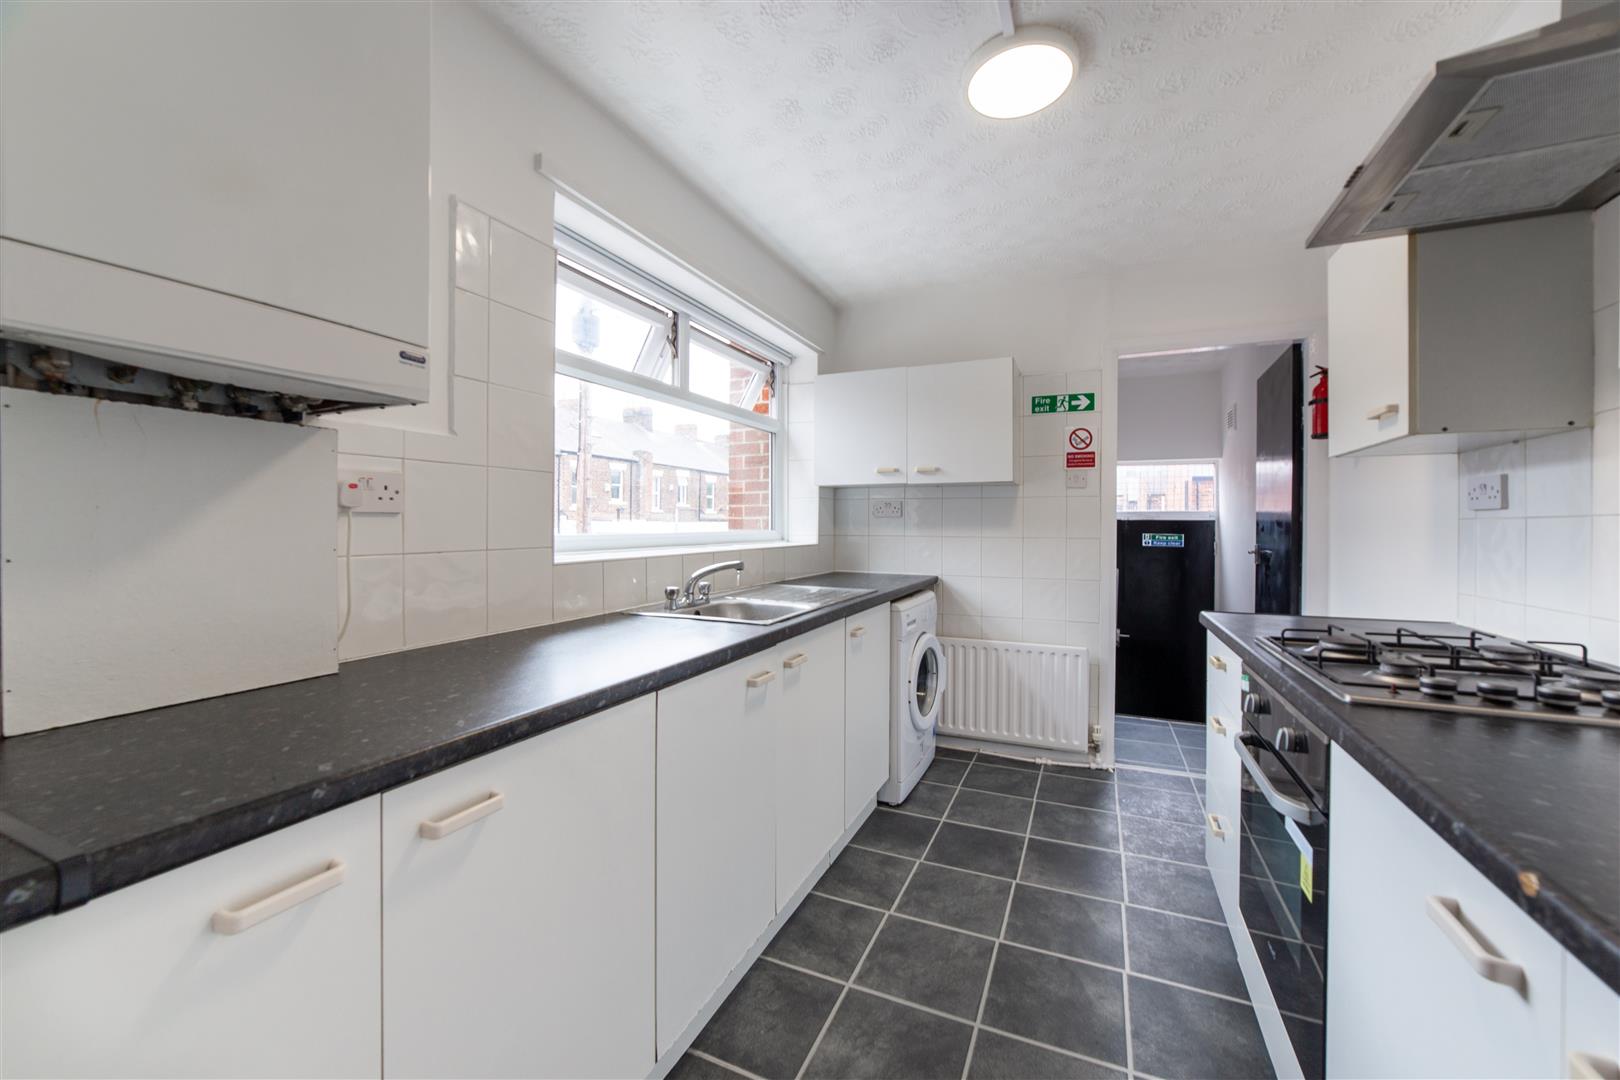 2 bed flat to rent in Dilston Road, Fenham - Property Image 1